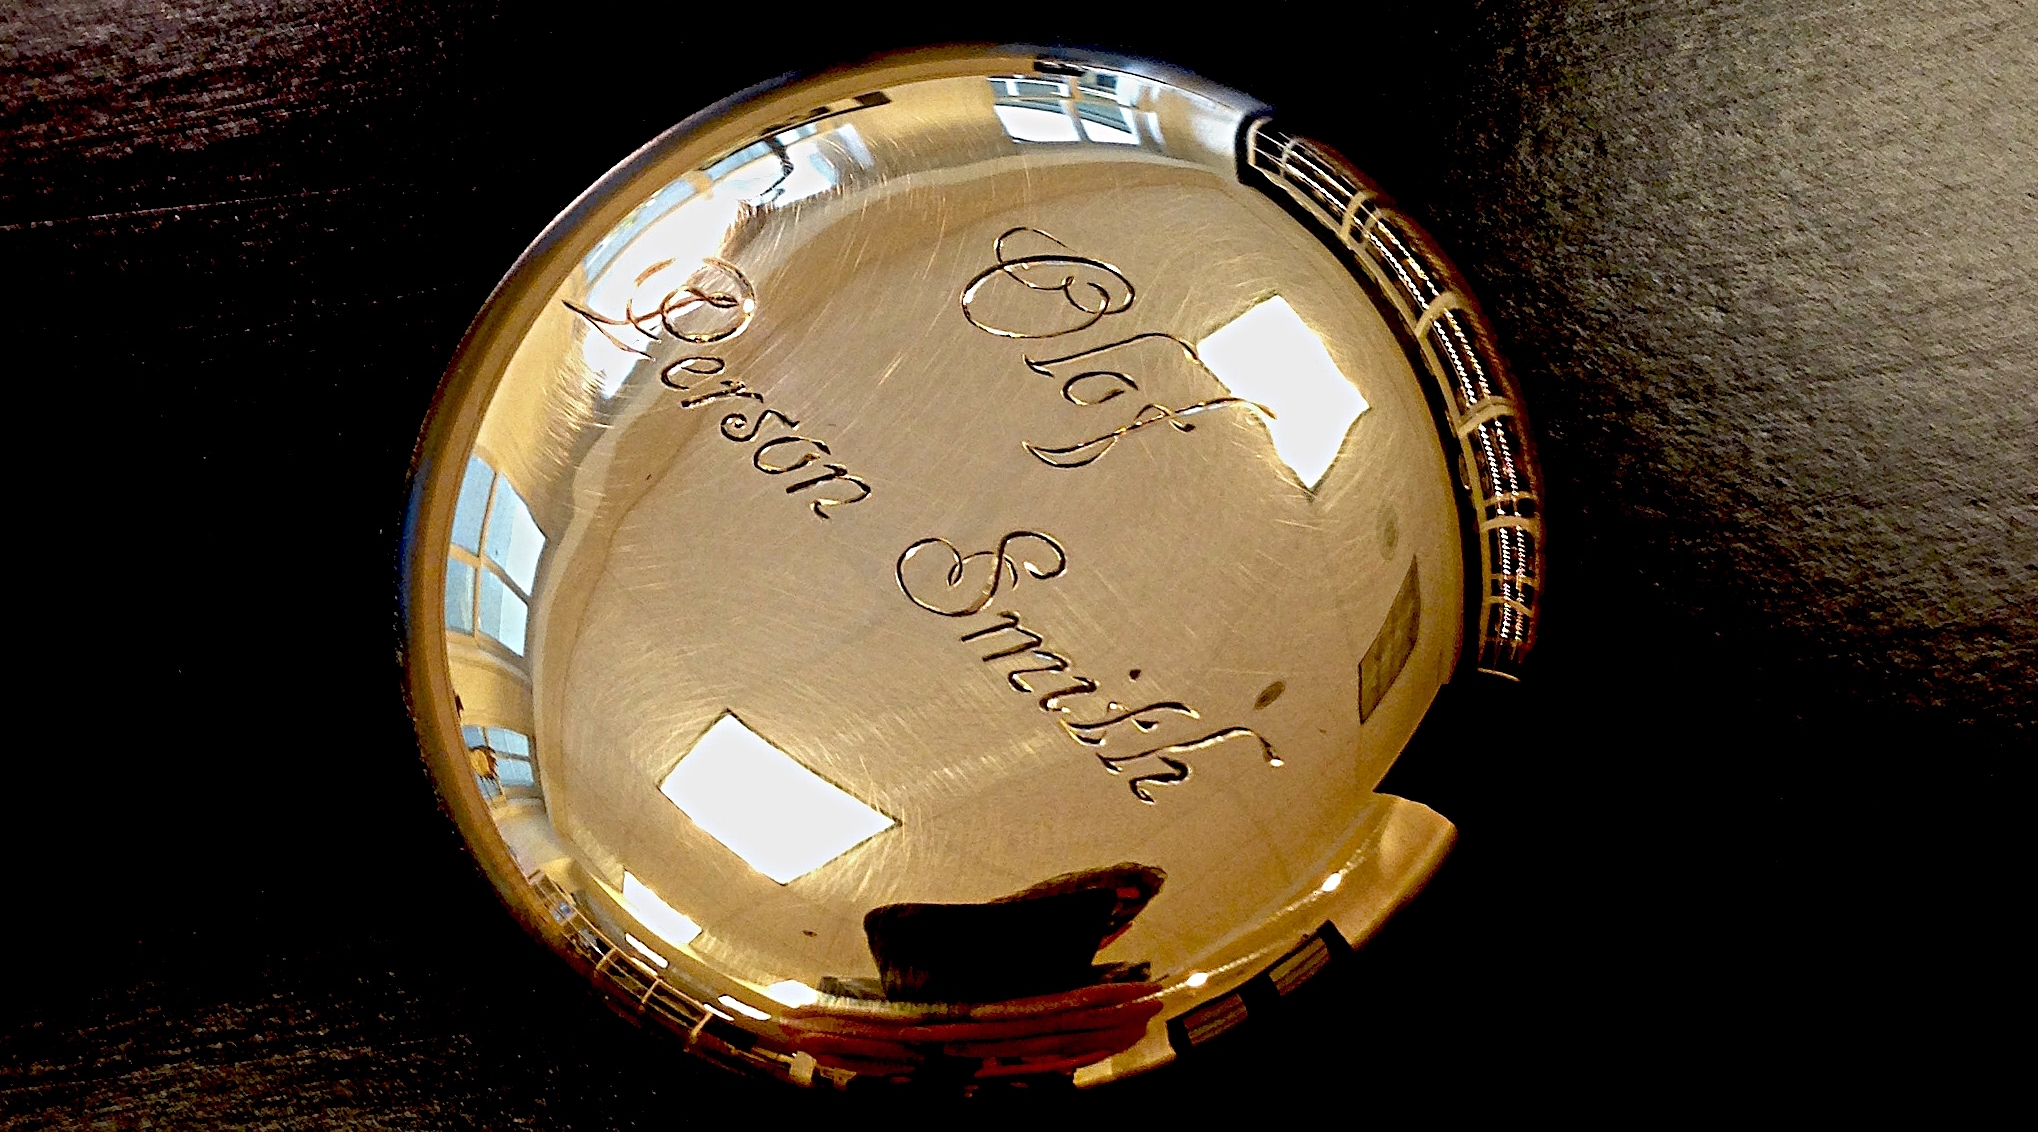 hand engraved gold watch with name